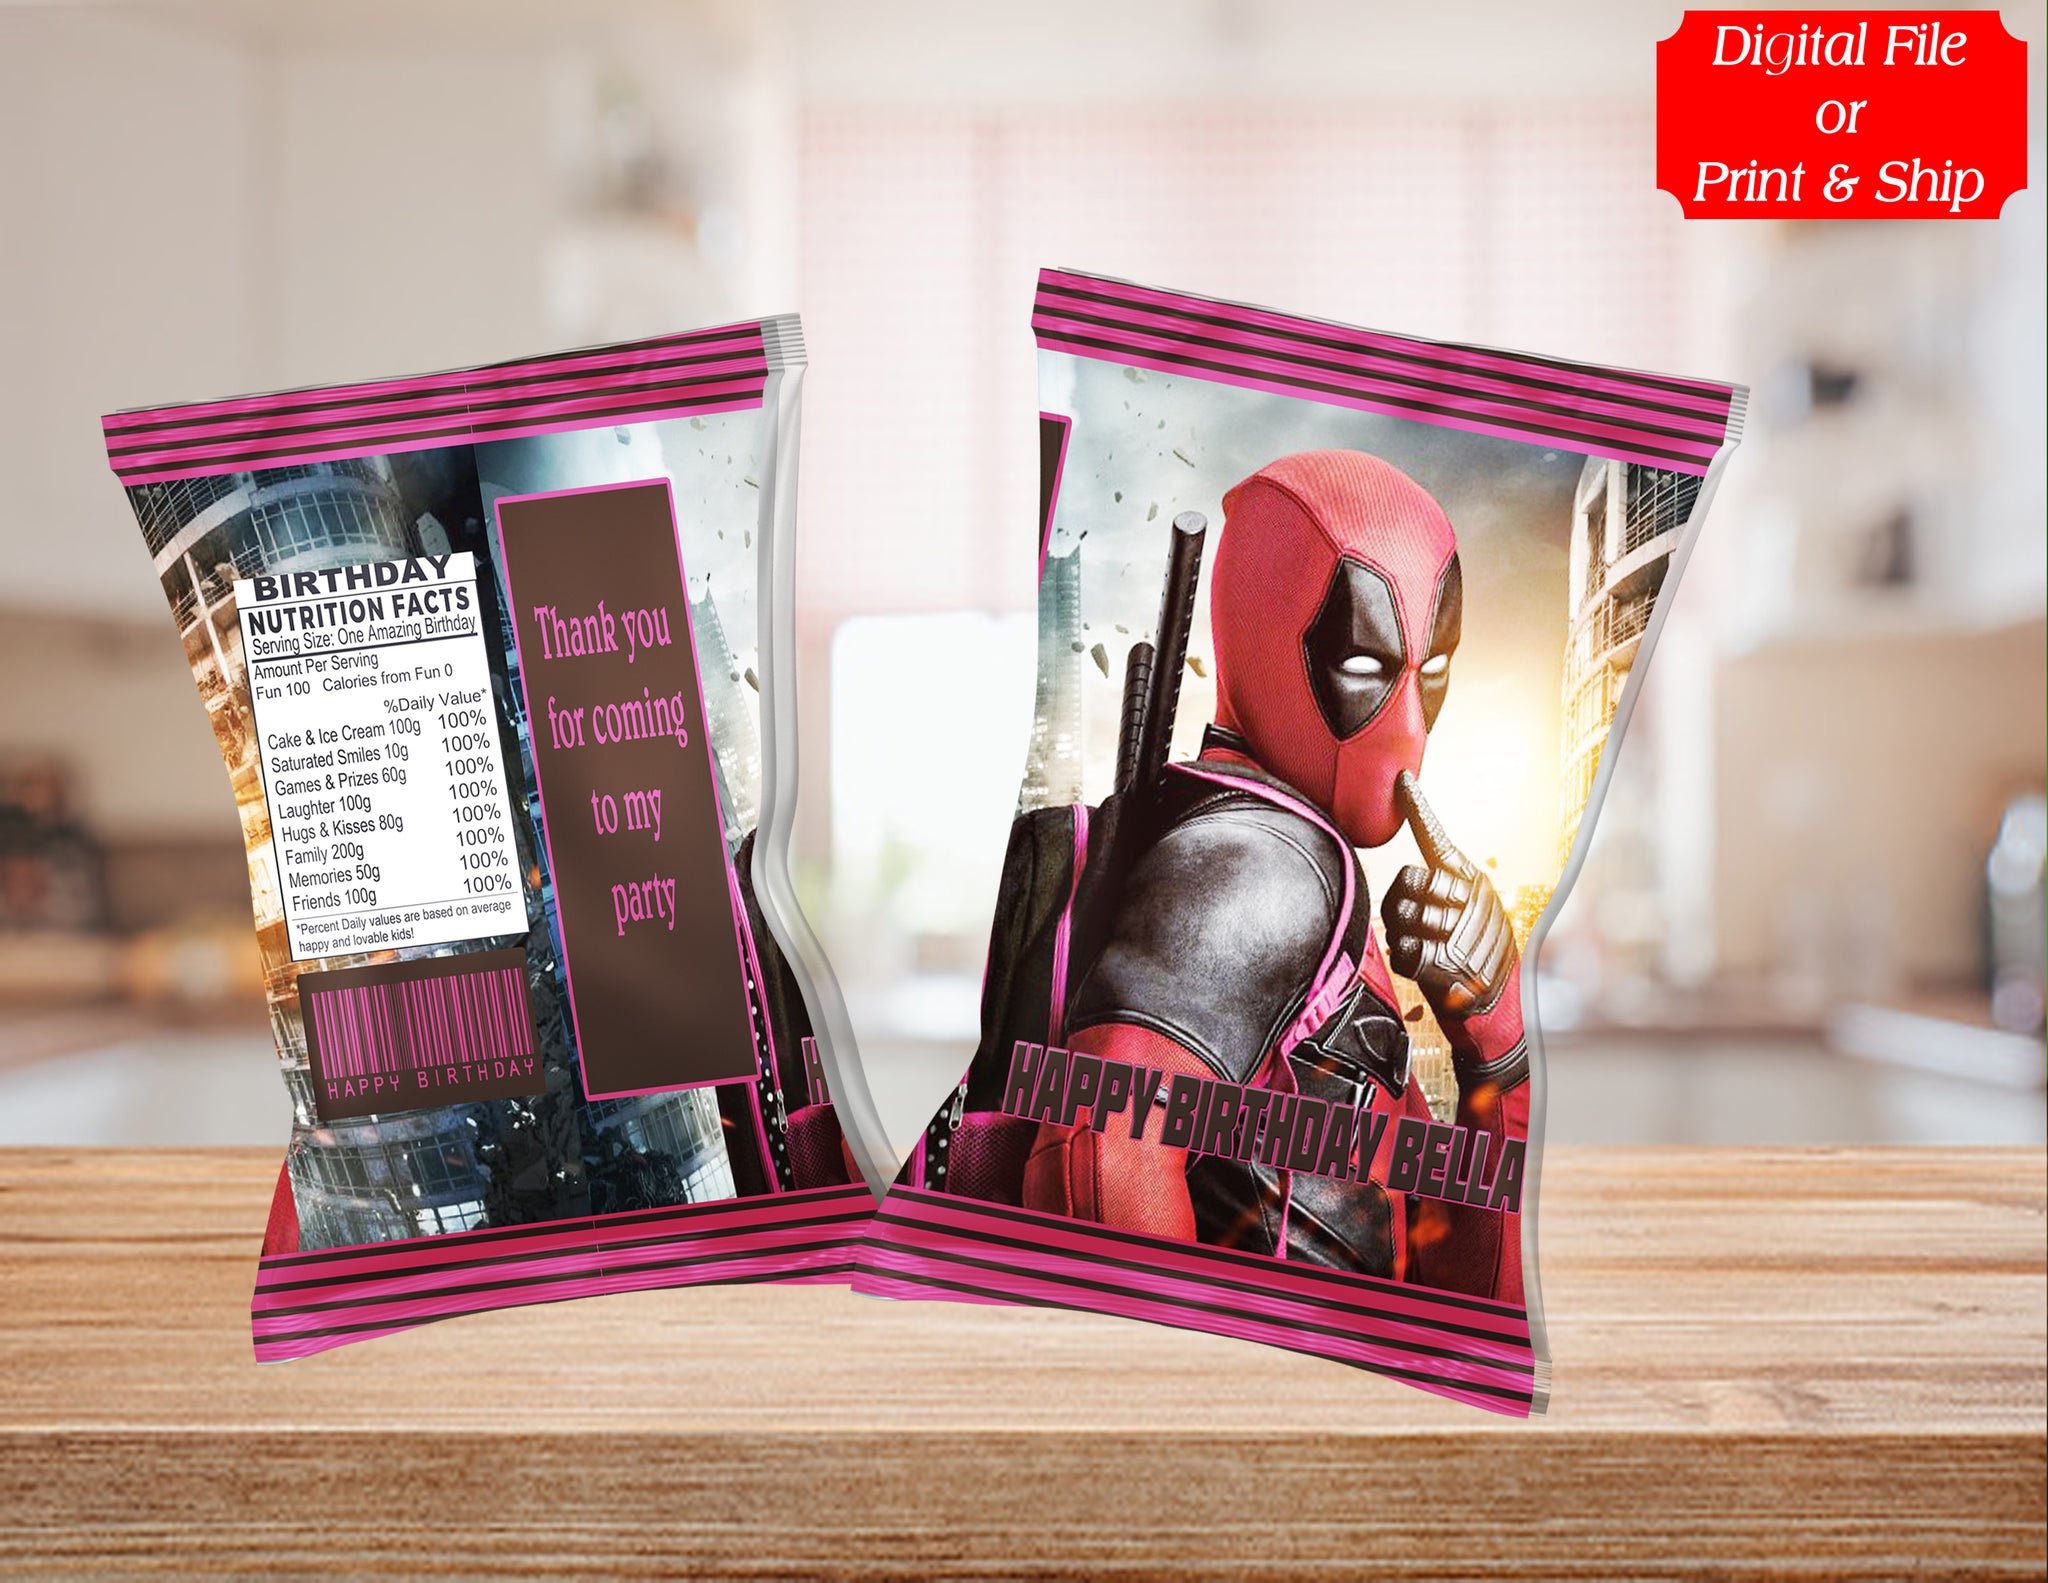 (12) Personalized DEADPOOL Chip Candy Treat Bags Party Favors Printed or D. File